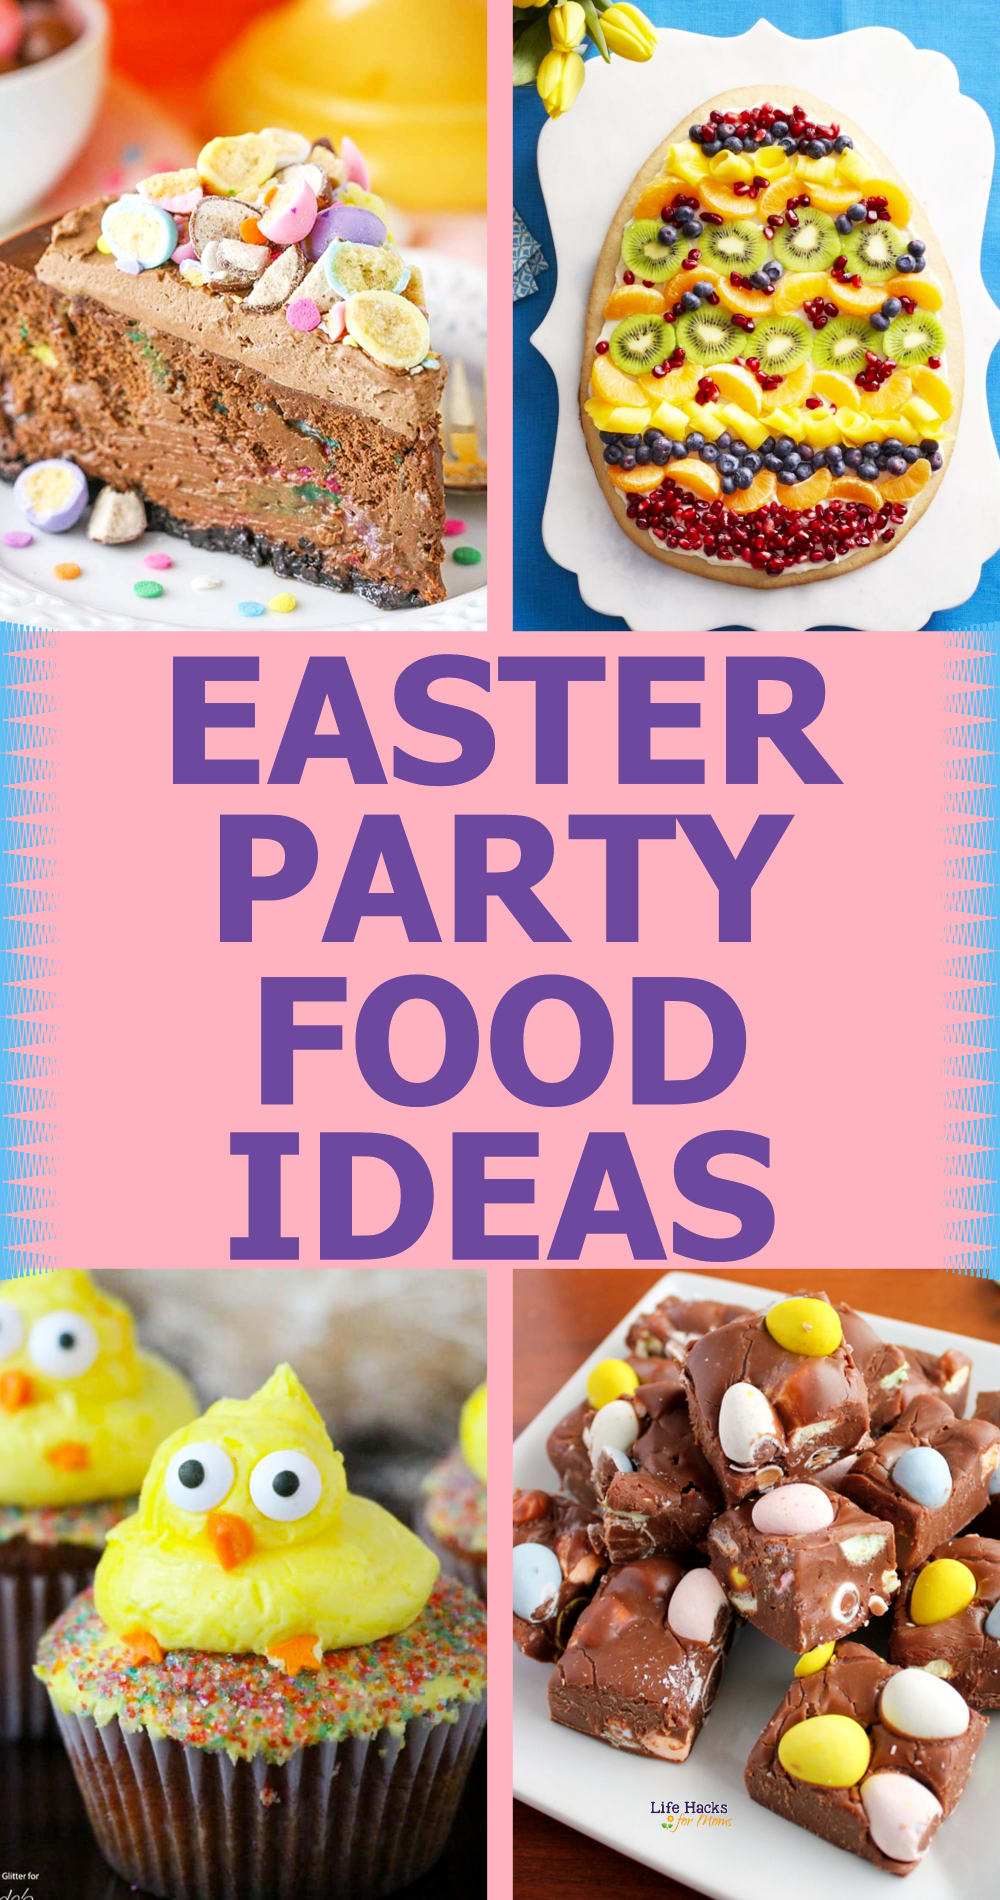 Easter party food dessert ideas - Easter-themed sweet treats for a potuck at work or church